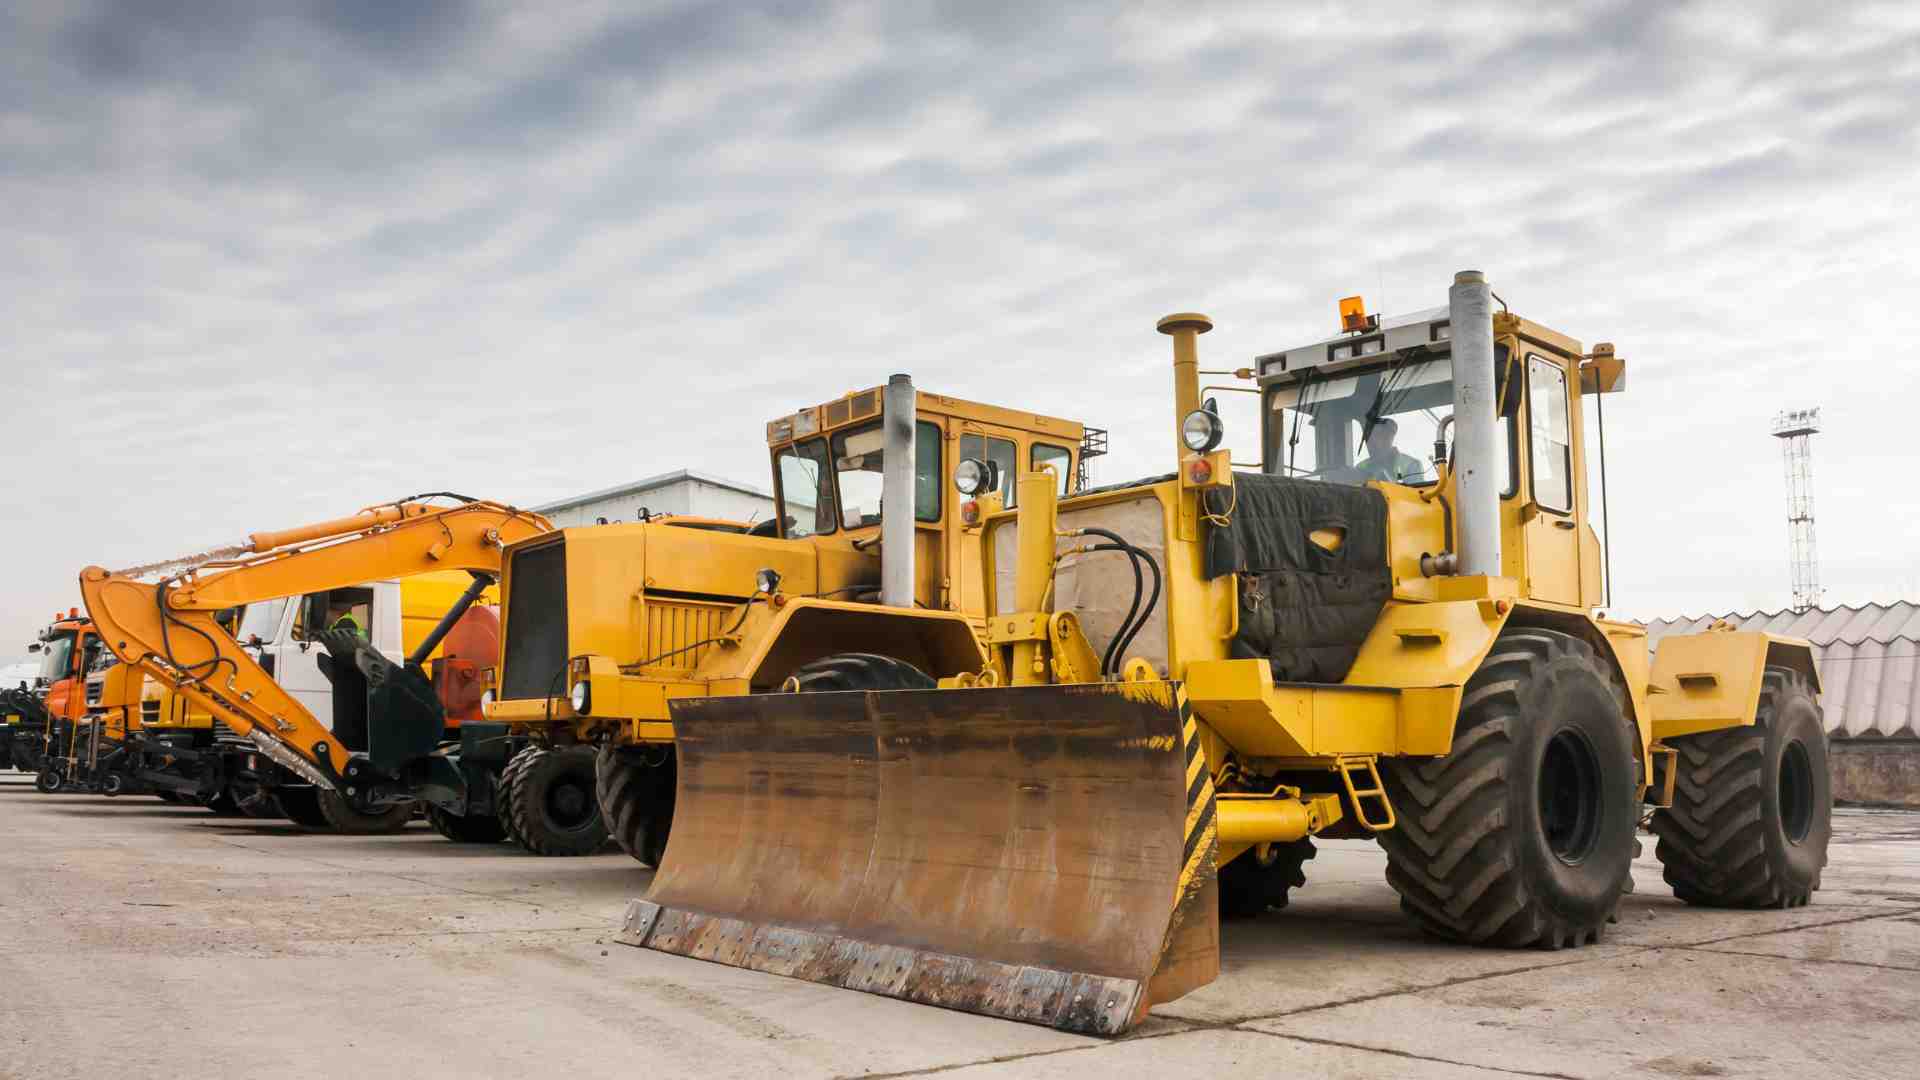 Various heavy, yellow machinery parked side-by-side in a yard